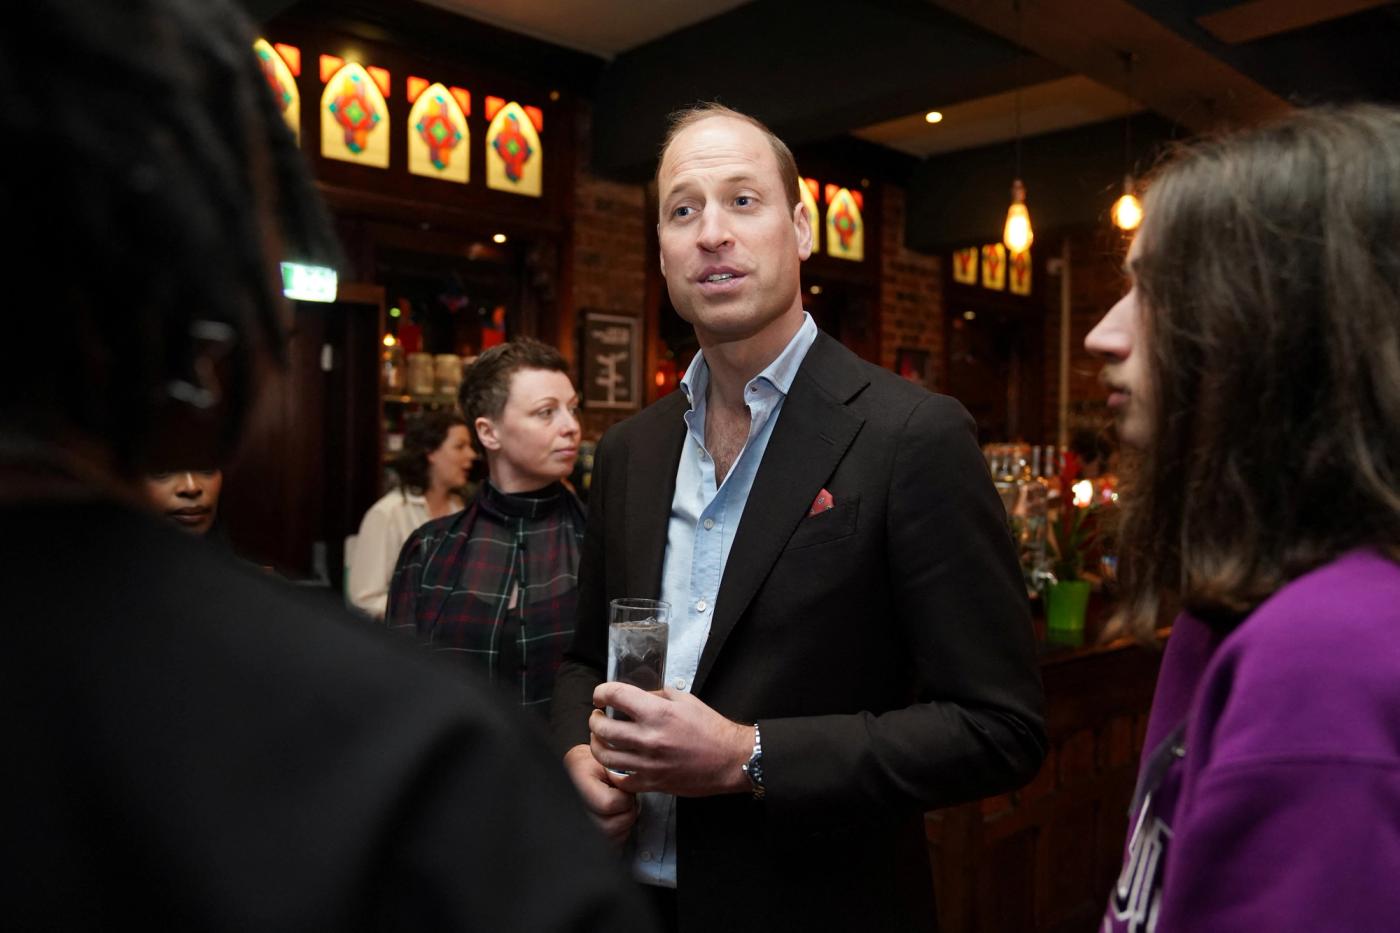 Britain's Prince William during a visit to The Rectory, Birmingham, to meet future leaders and local business owners from Birmingham's creative industries sector. Picture date: Thursday April 20, 2023. Jacob King/Pool via REUTERS